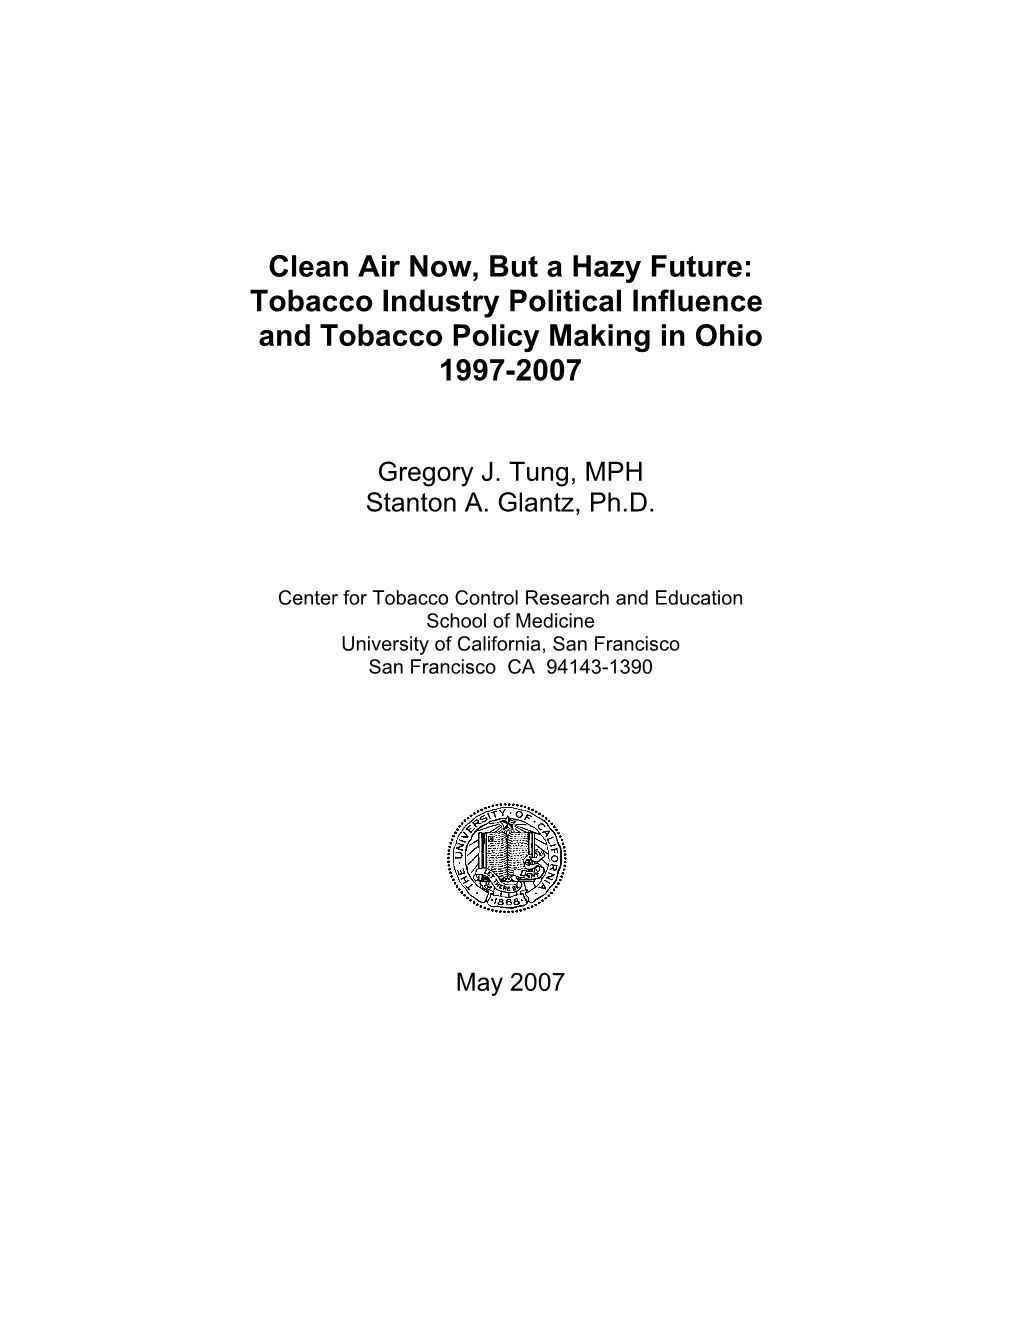 Tobacco Industry Political Influence and Tobacco Policy Making in Ohio 1997-2007